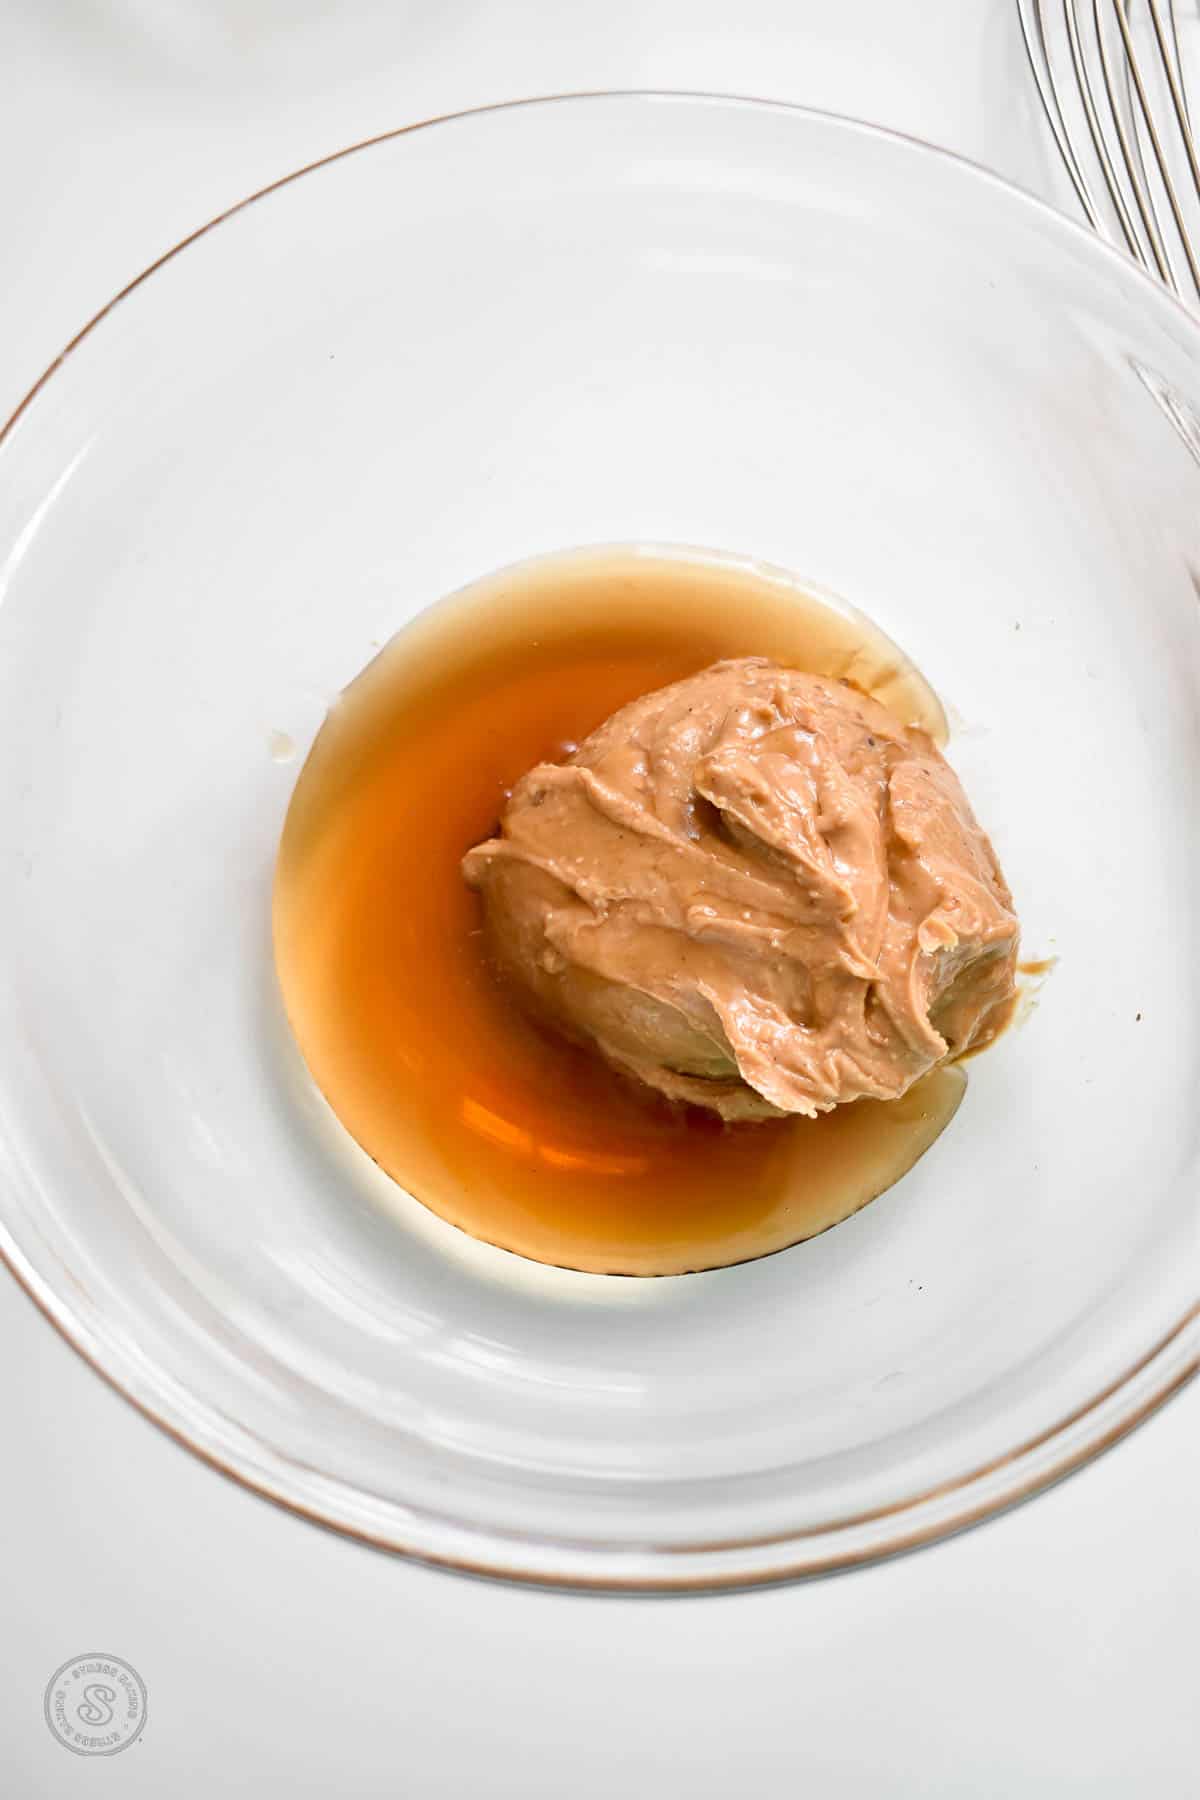 Peanut butter and maple syrup in a small clear mixing bowl